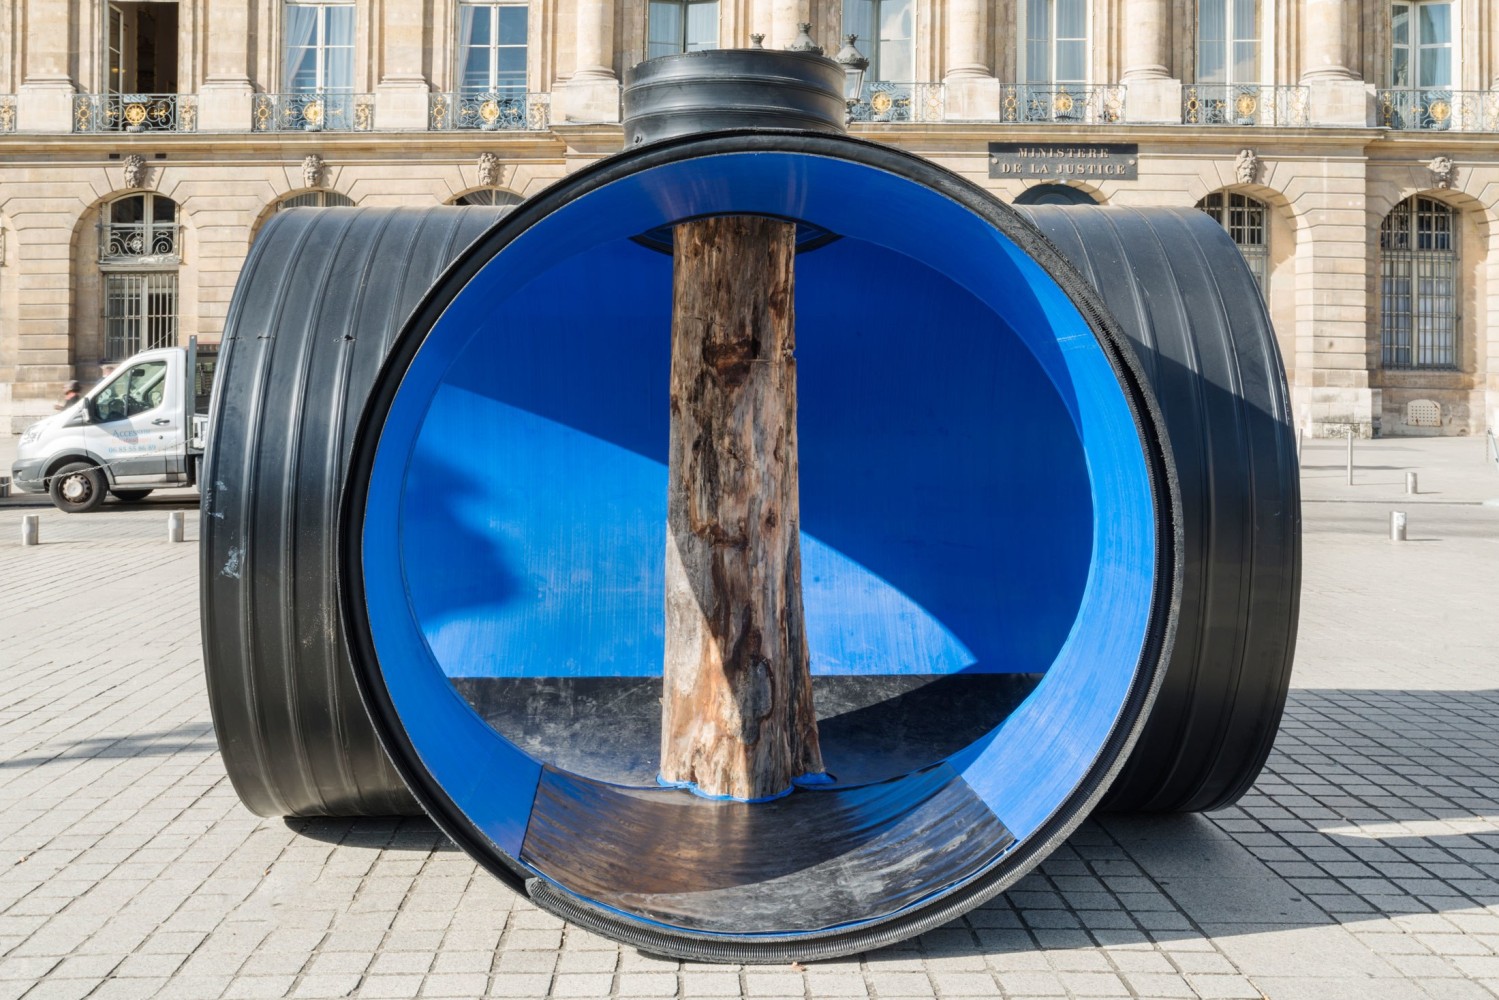 Oscar Tuazon
Rainwater, 2017
One of four elements in&amp;nbsp;Une Colonne d&amp;#39;Eau, 2017
Thermoplastic hoses, tree trunks
105 2/3 x 82 3/4 x 122 1/10&amp;nbsp;inches
(268 x 210 x 310&amp;nbsp;cm)
Installation view
Place Vend&amp;ocirc;me, Paris (October 16&amp;nbsp;&amp;ndash; November 9, 2017)
Photograph by Marc Domage